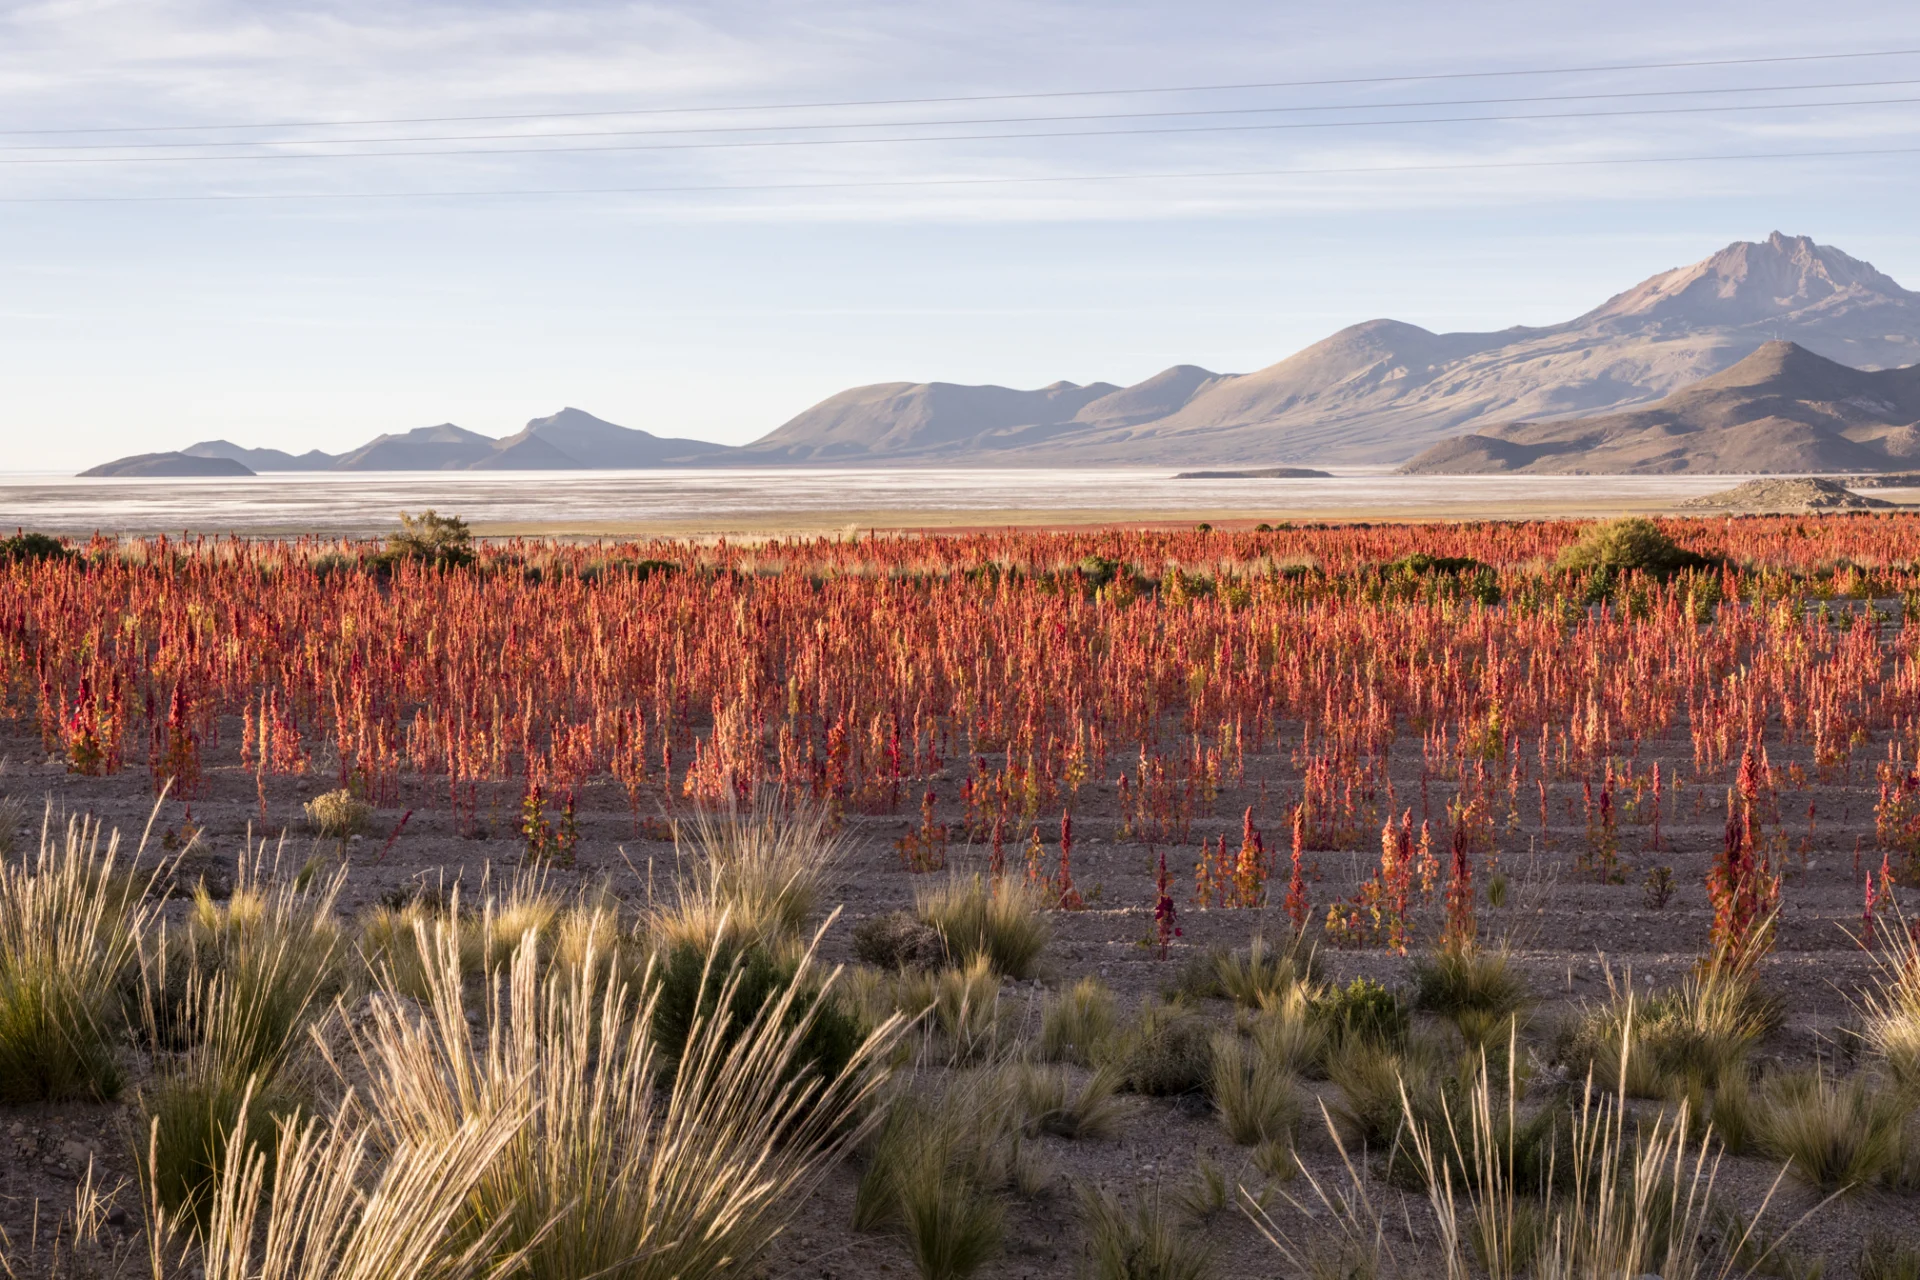 A quinoa field in the foreground, behind it hills of the Bolivian highlands ​